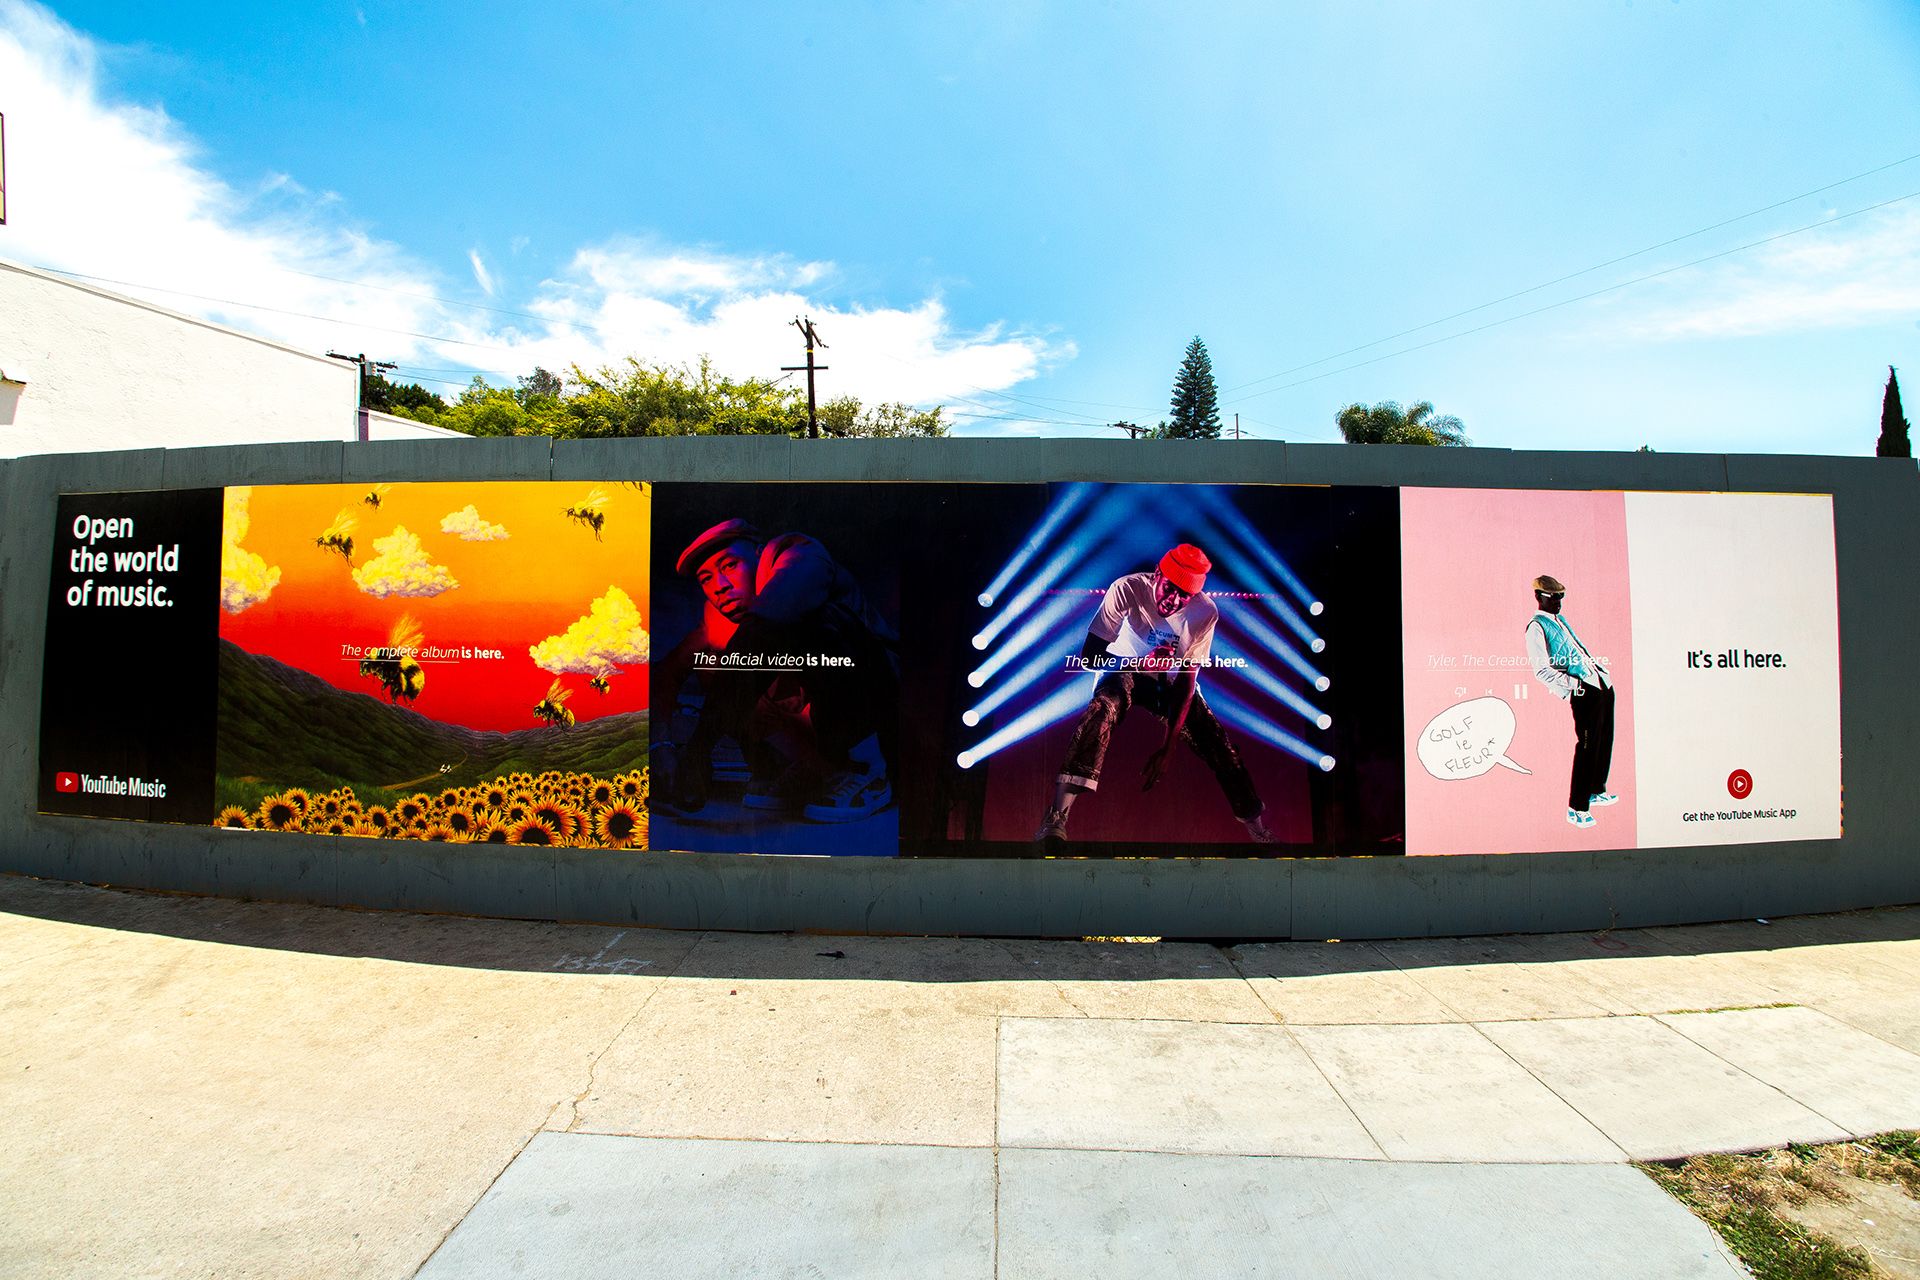 Various YouTube Music poster ads displayed on green wall next to sidewalk.